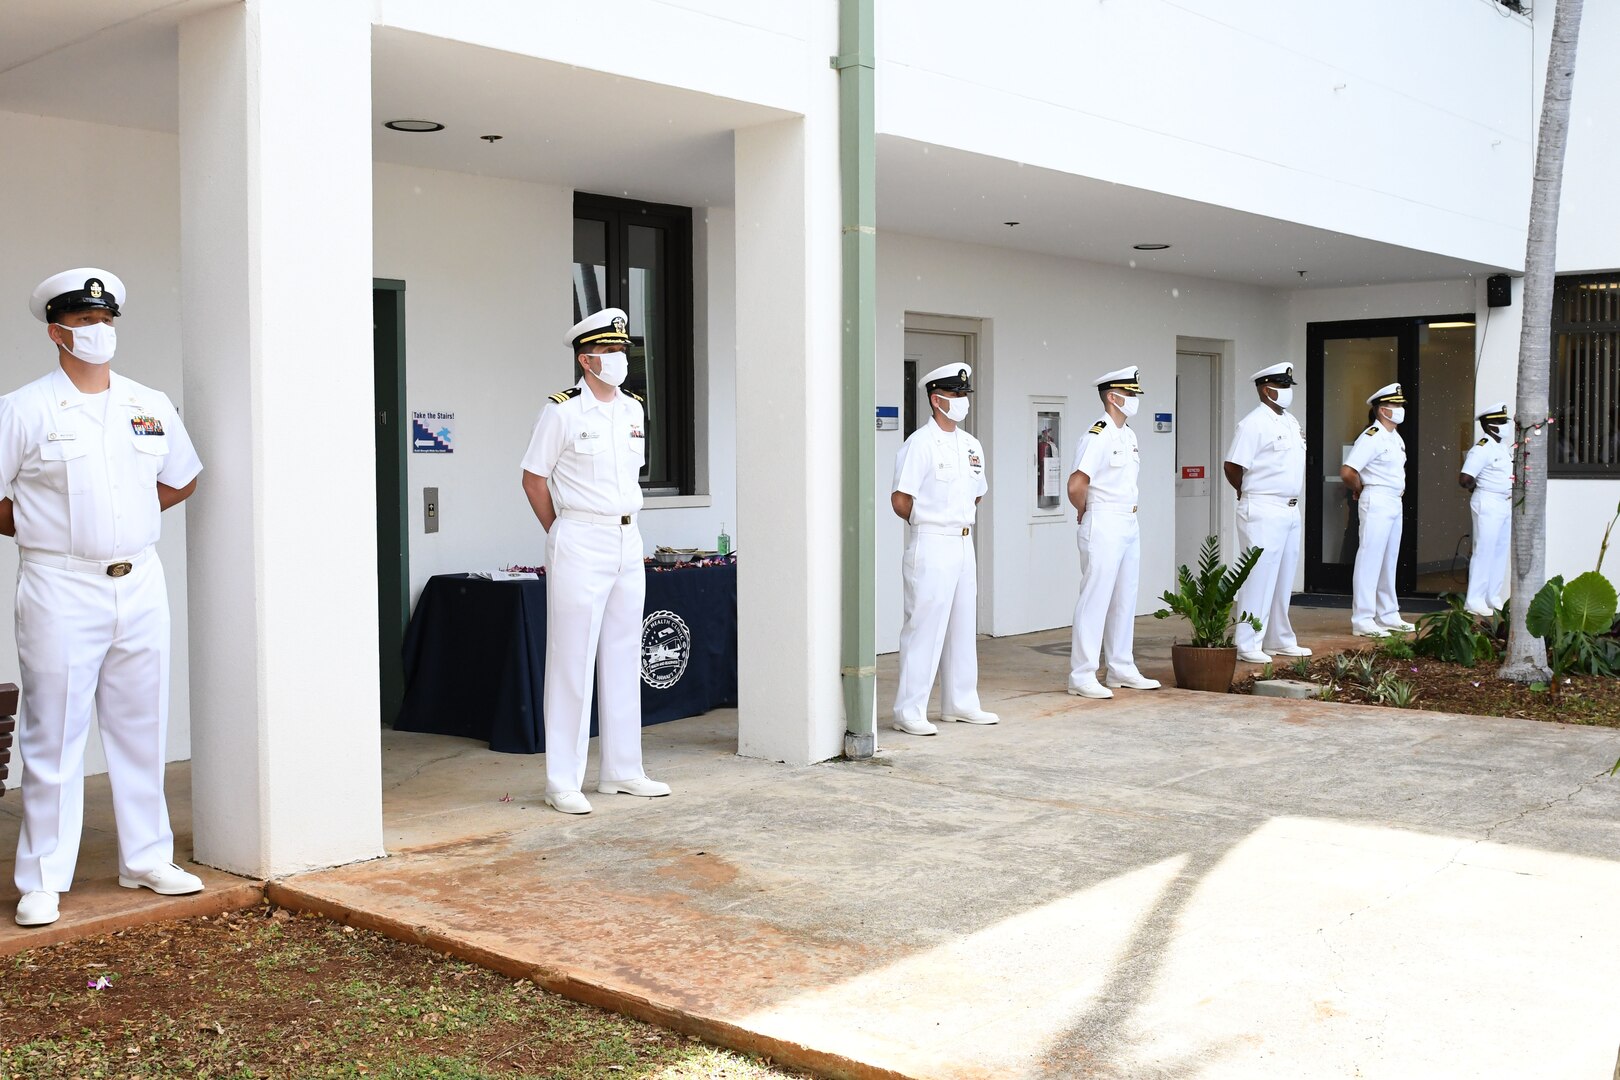 Sailors are posted on the rails around the ceremony